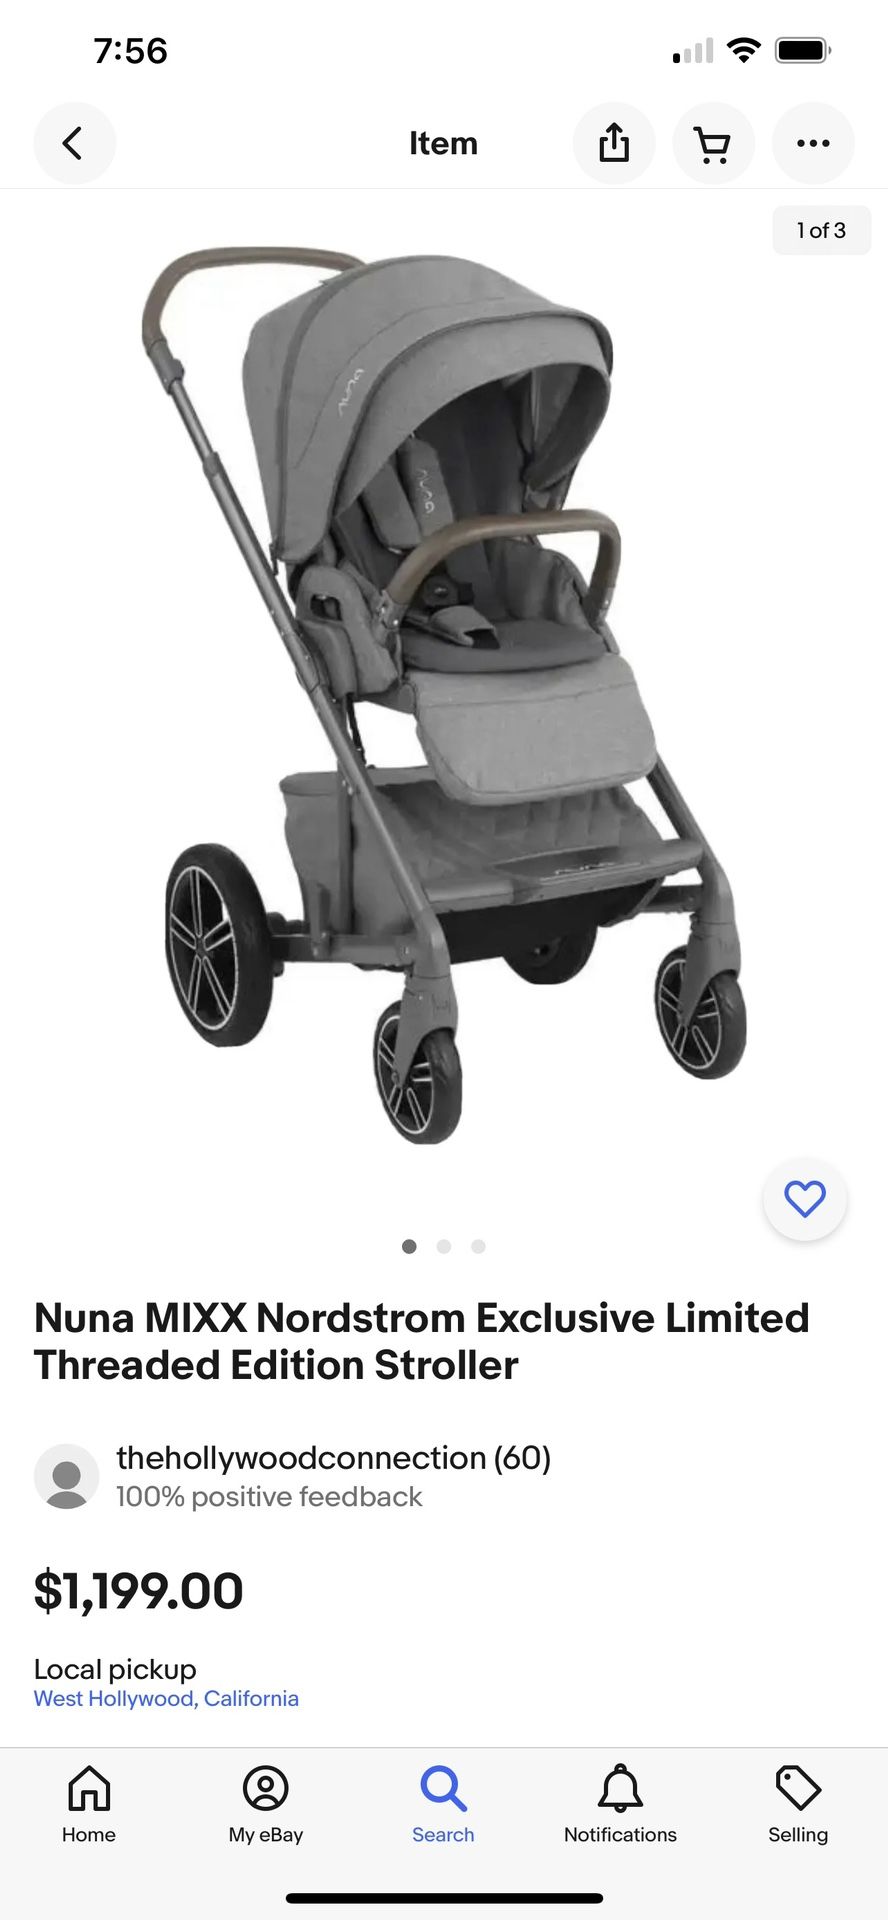 This is Nordstrom exclusive color( limited edition) Stroller + PIPA RX Car Seat+ Base